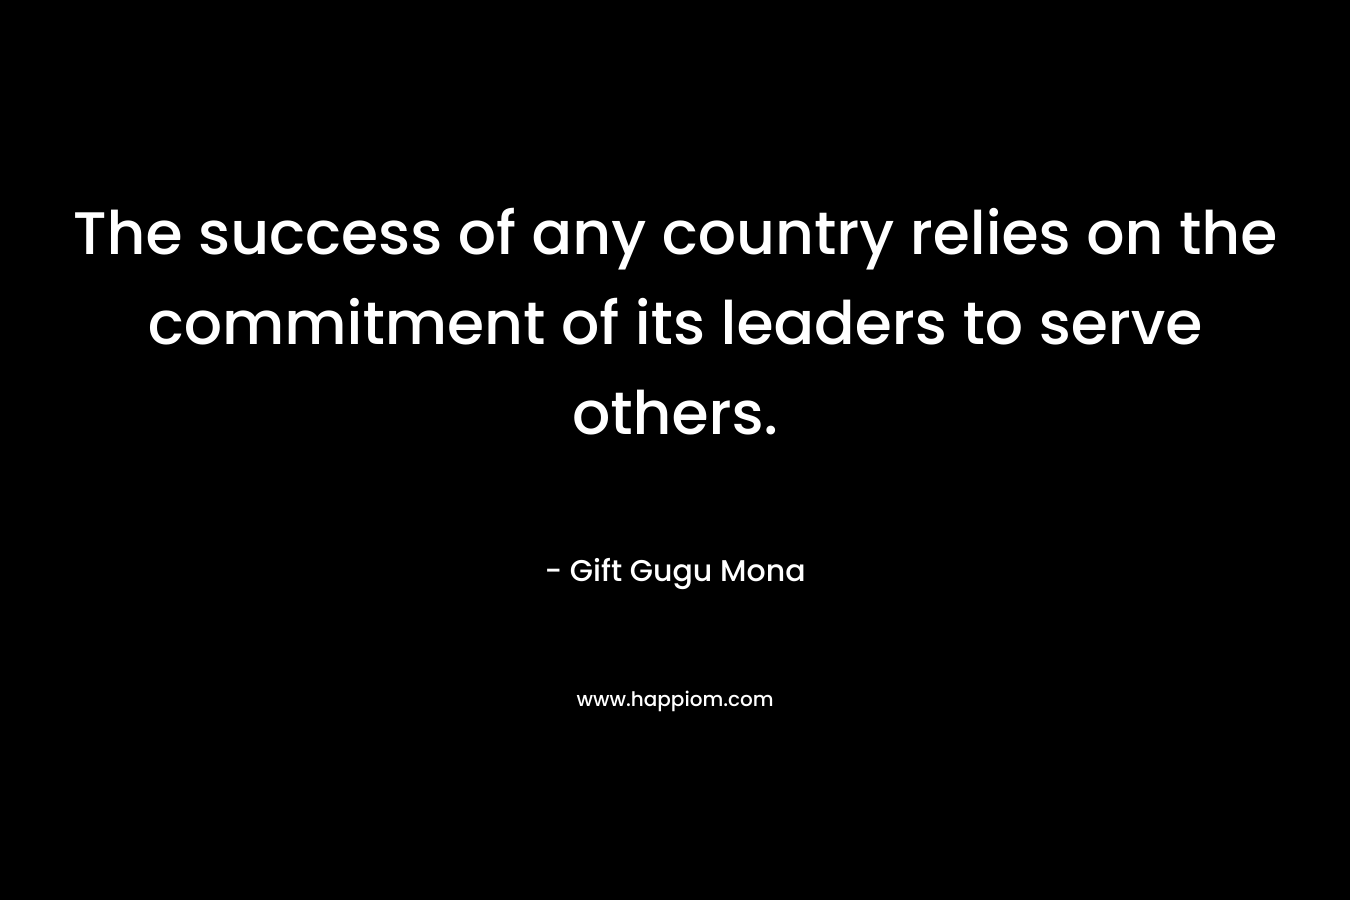 The success of any country relies on the commitment of its leaders to serve others. – Gift Gugu Mona